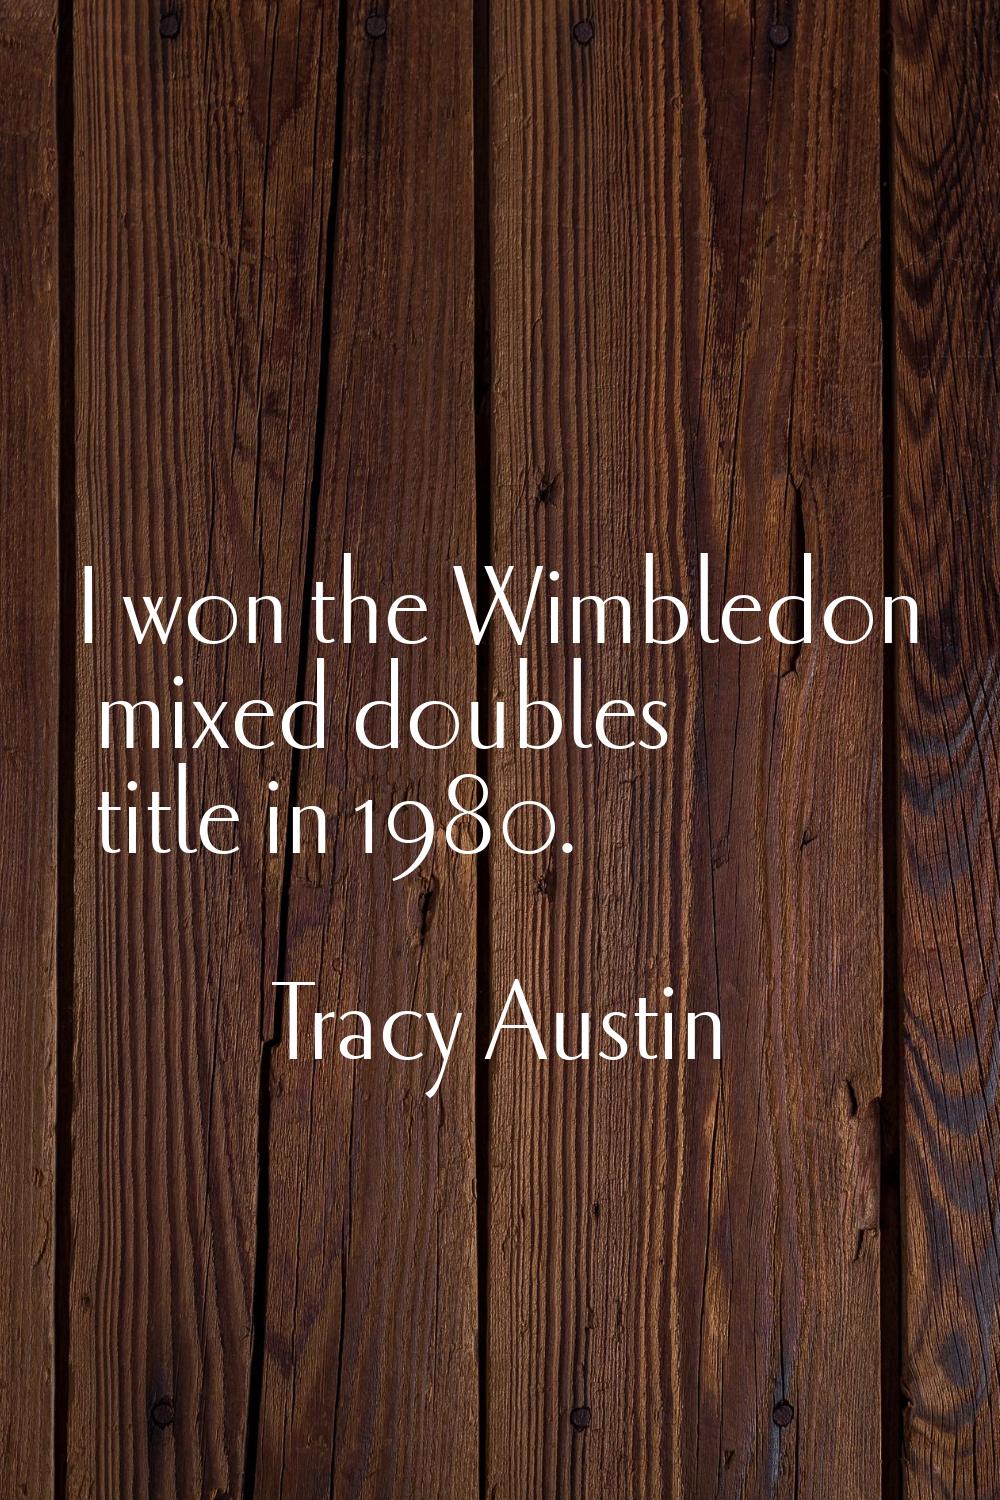 I won the Wimbledon mixed doubles title in 1980.